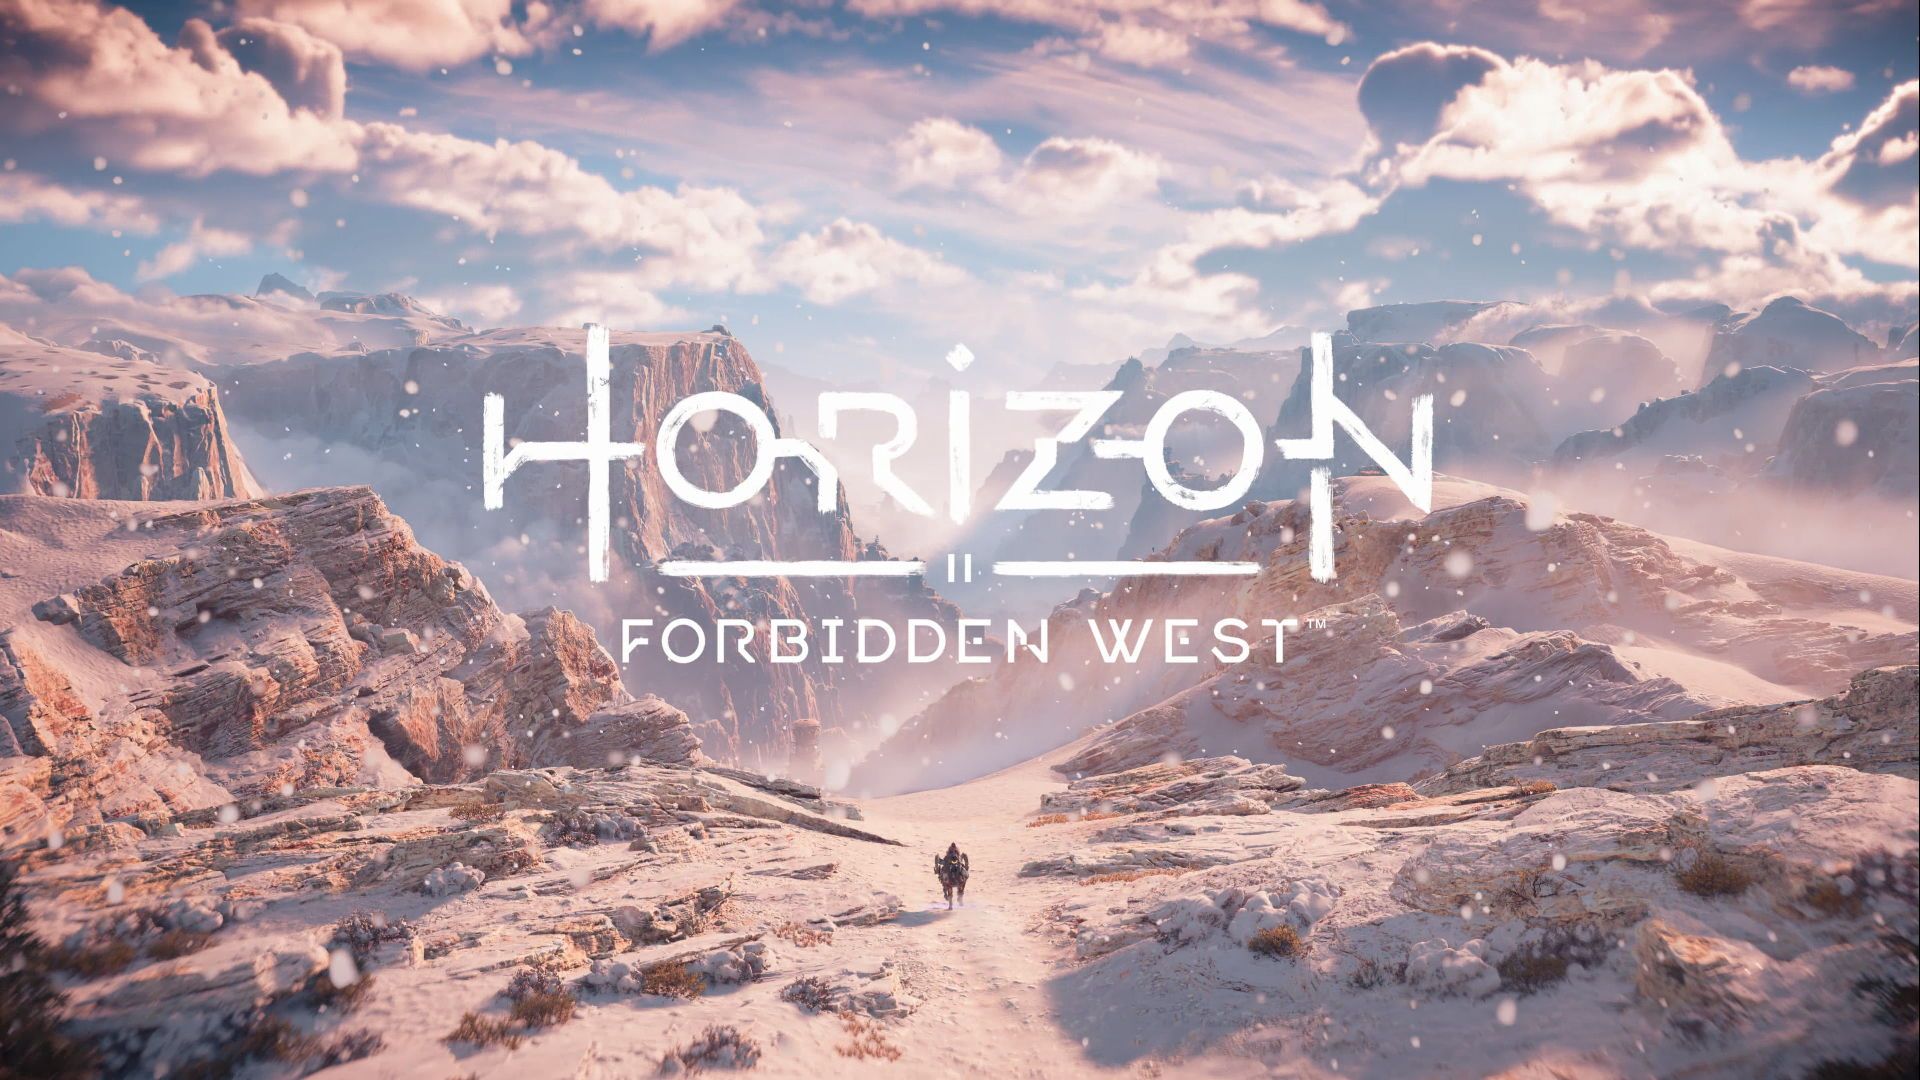 Horizon: Trying to get to the Forbidden West